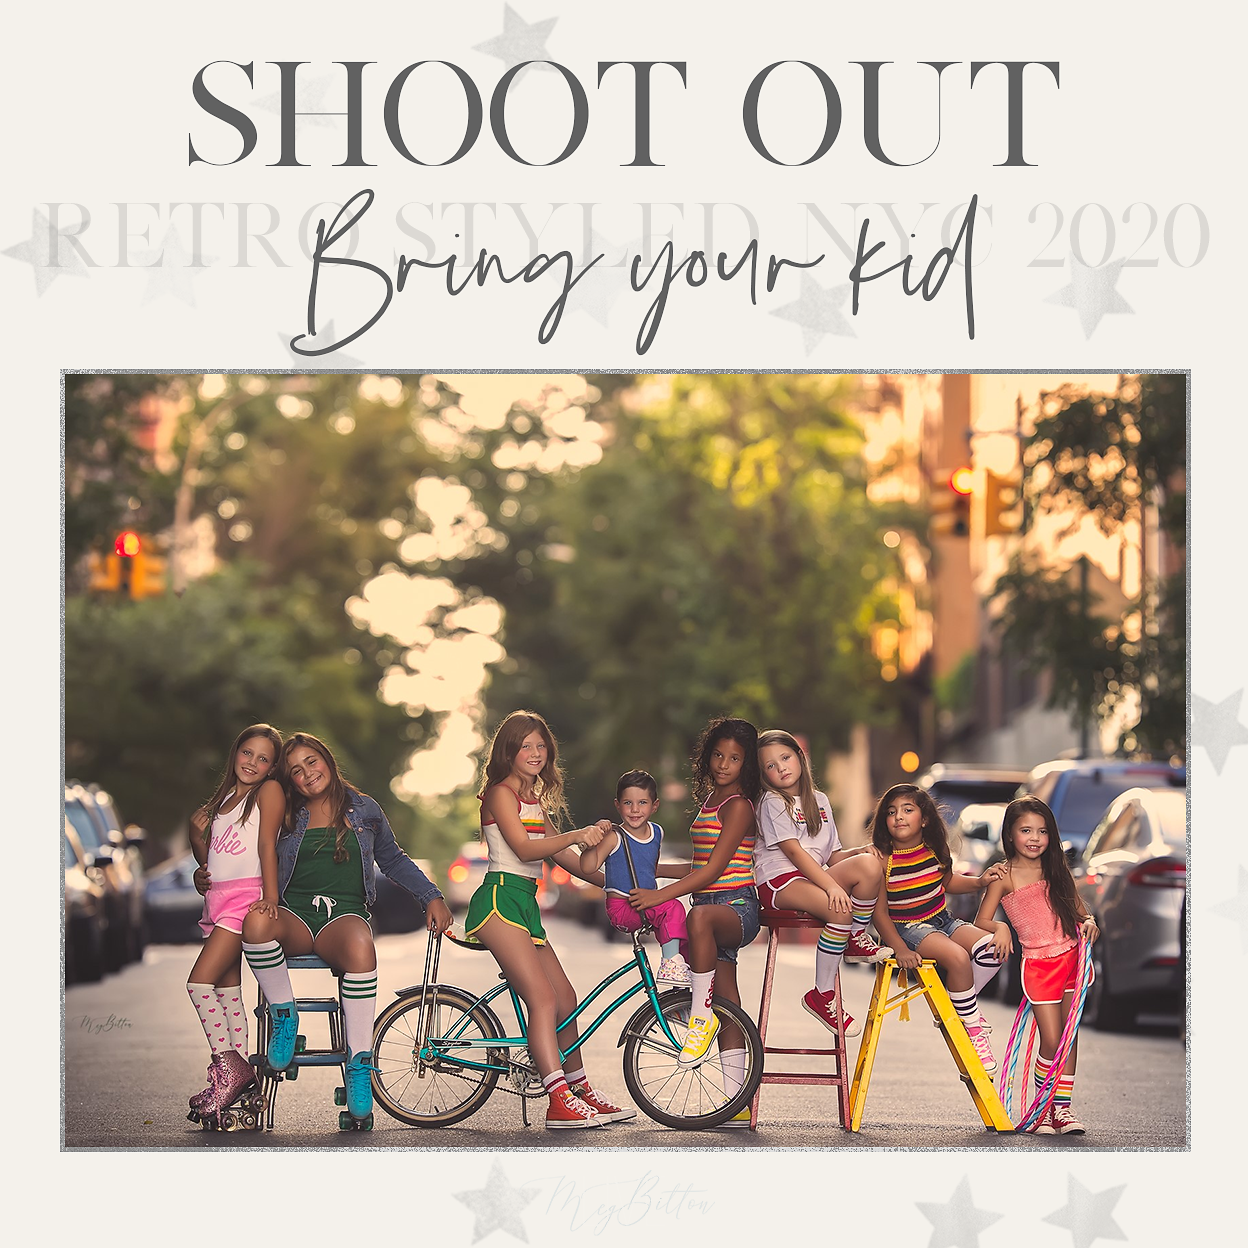 Retro Styled NYC Shoot Out 2020 - Bring Your Own Kid - Meg Bitton Productions